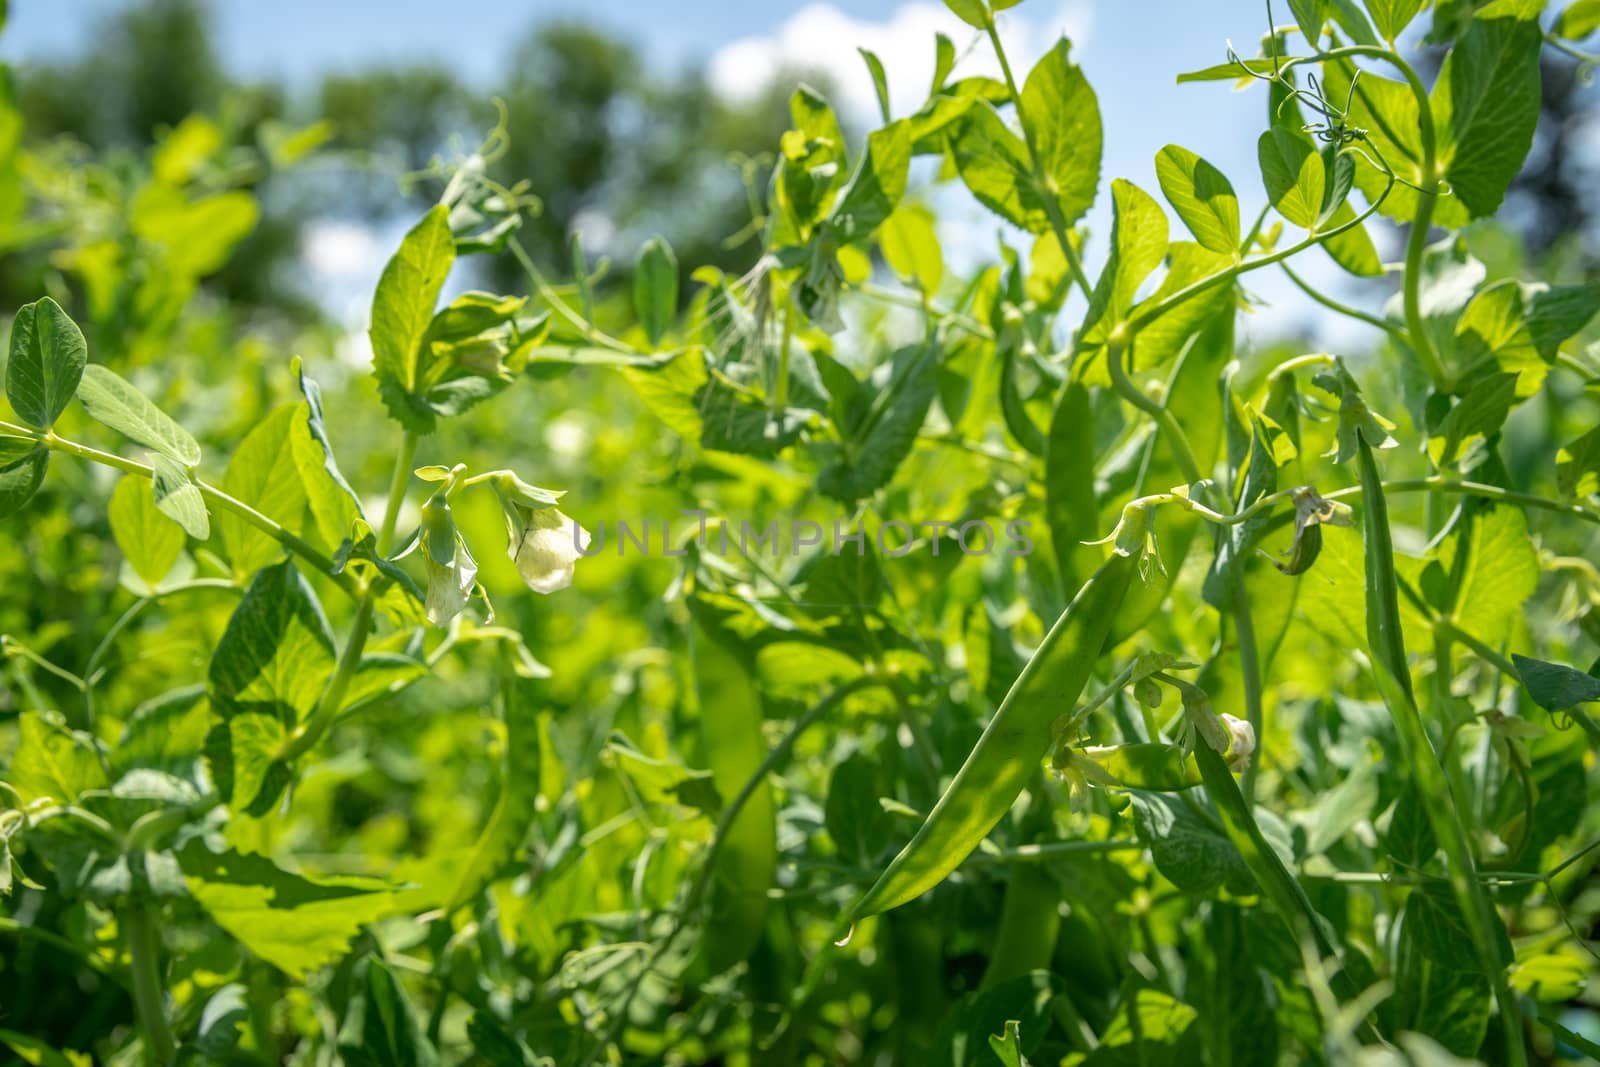 growing green sugar peas in organic quality without pesticide on the farm.